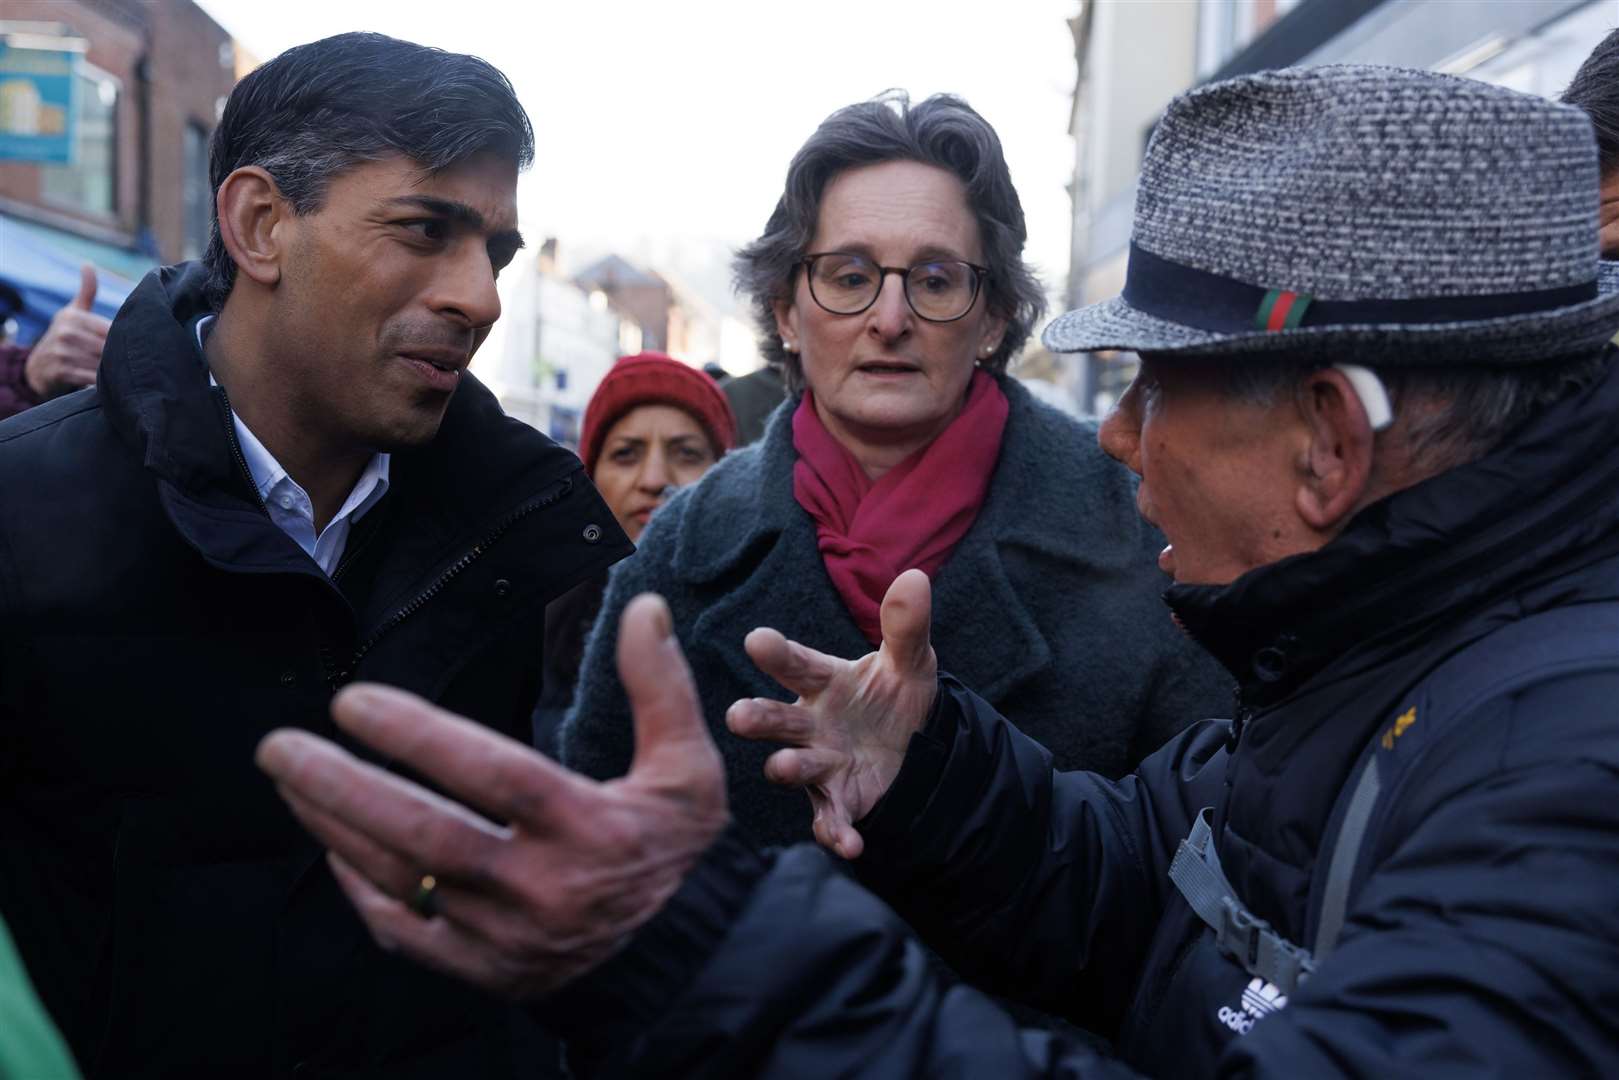 A man talks to Rishi Sunak as he meets members of the public during a walkabout in Winchester, Hampshire (Dan Kitwood/PA)